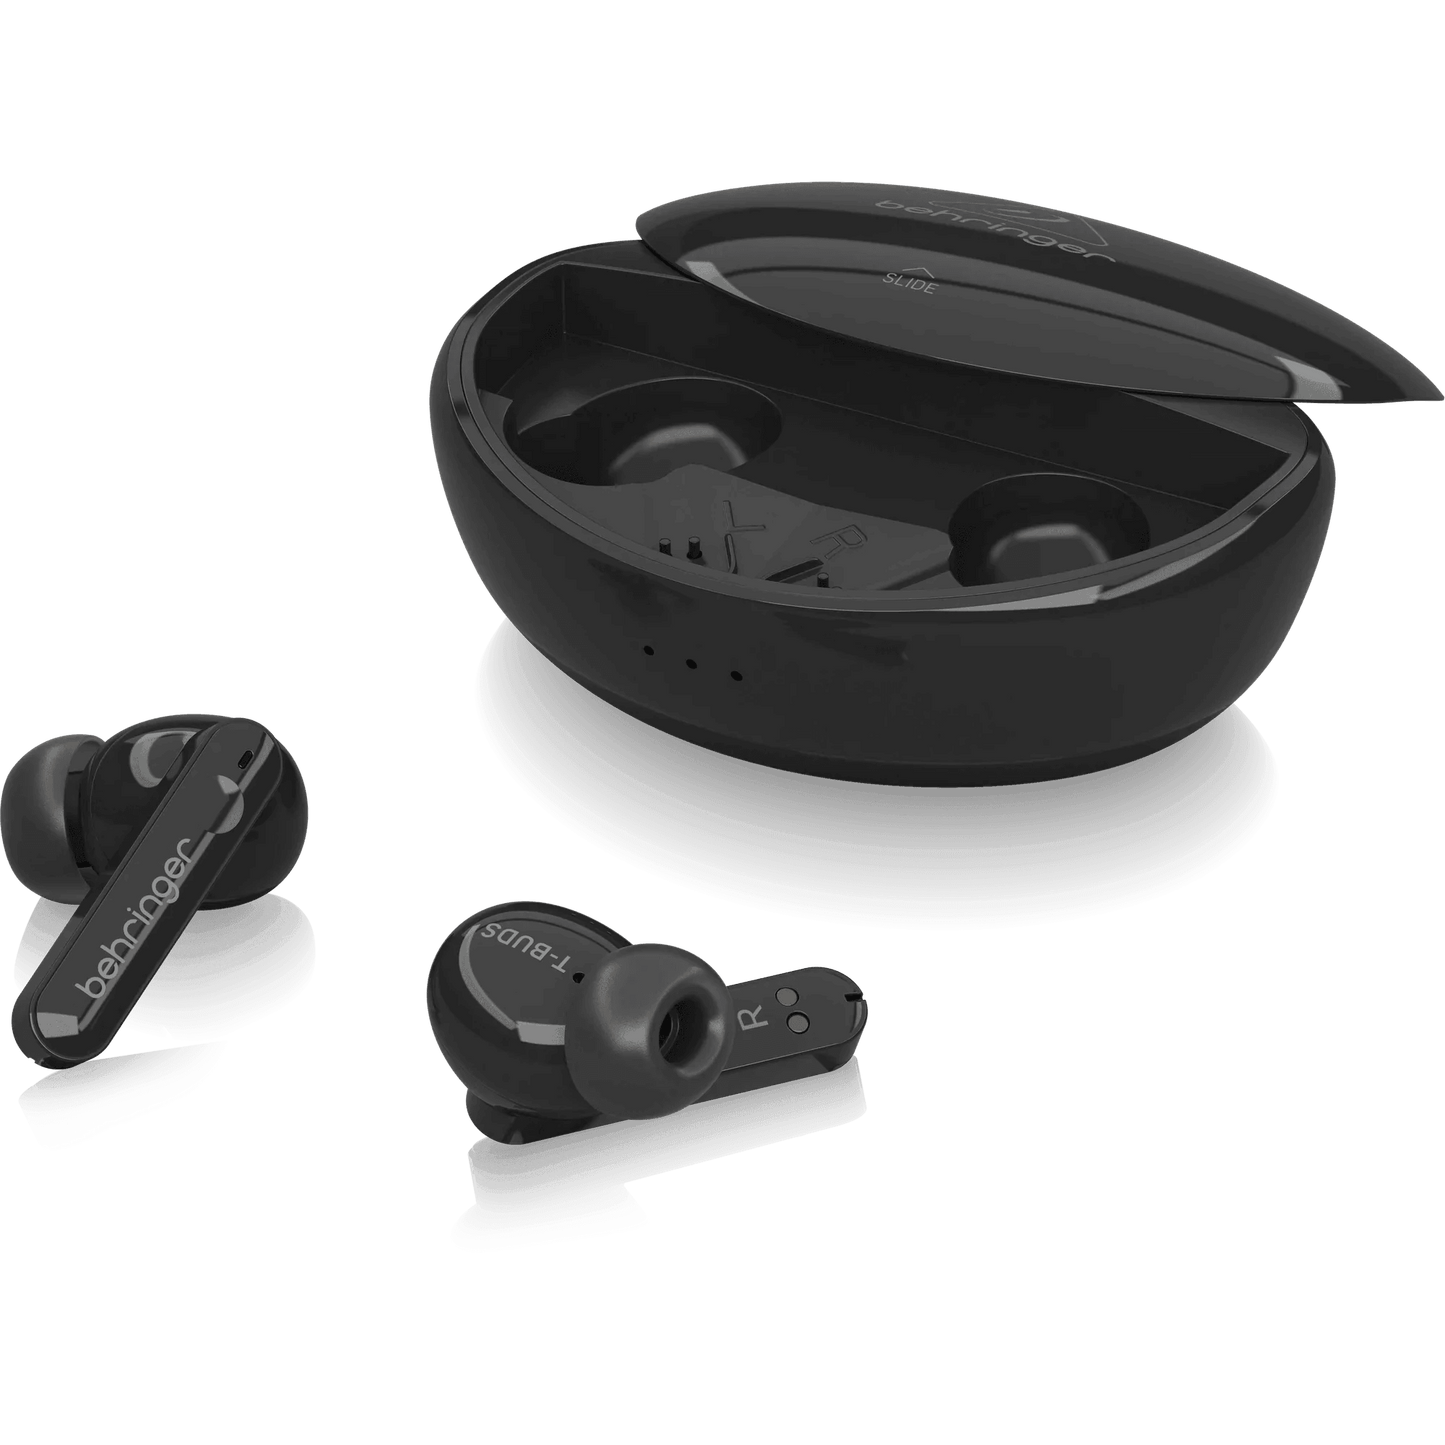 Behringer T-BUDS High-Fidelity True Wireless Stereo Earbuds with Bluetooth and Active Noise Cancellation